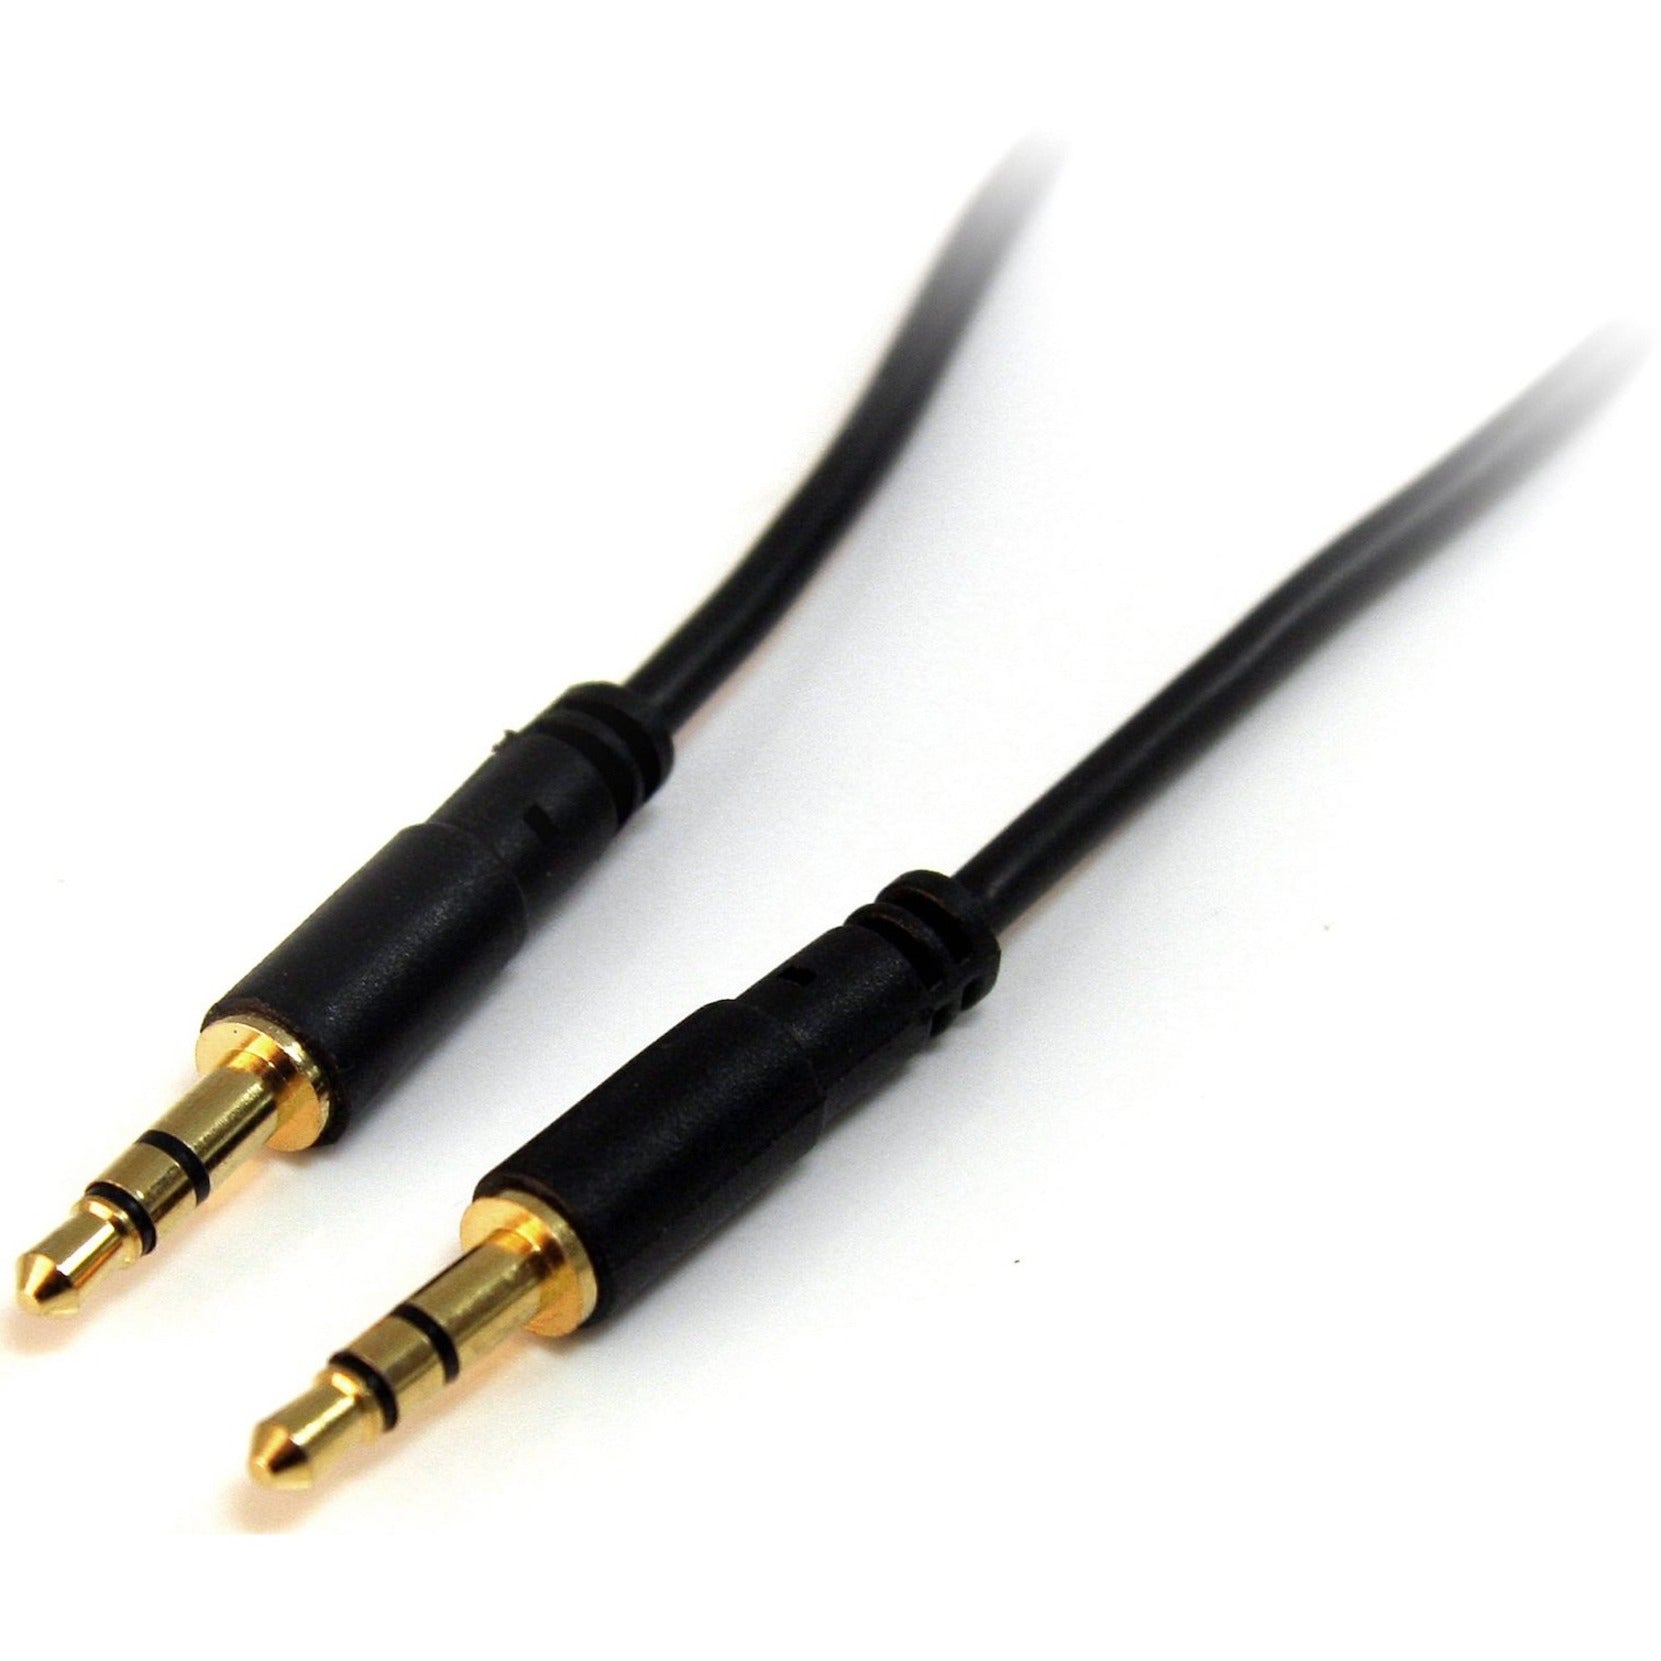 StarTech.com MU10MMS 10 ft Slim 3.5mm Stereo Audio Cable - M/M, Molded, Gold-Plated Connectors, Strain Relief